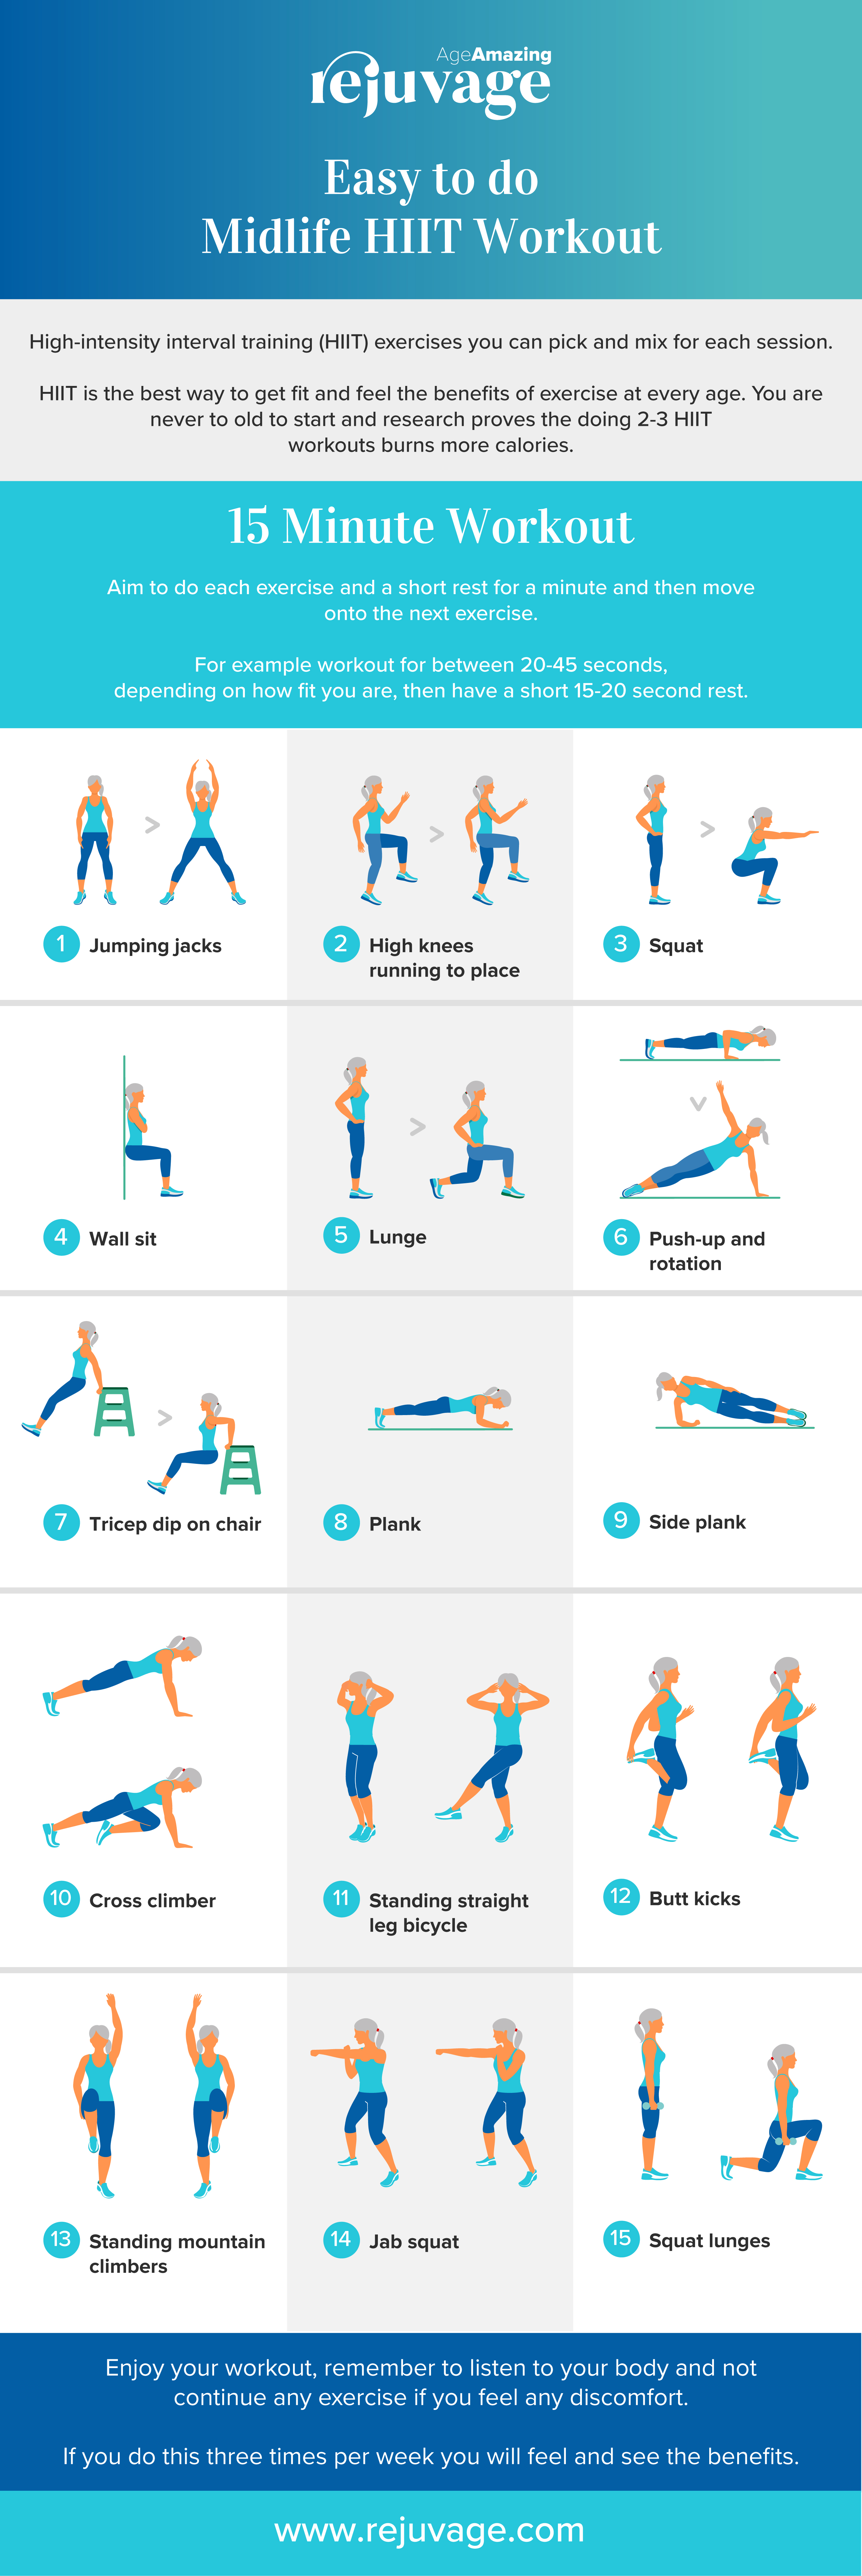 Get Fit Over 50 Easy 15 Minute HIIT Workout To Do at Home  Rejuvage